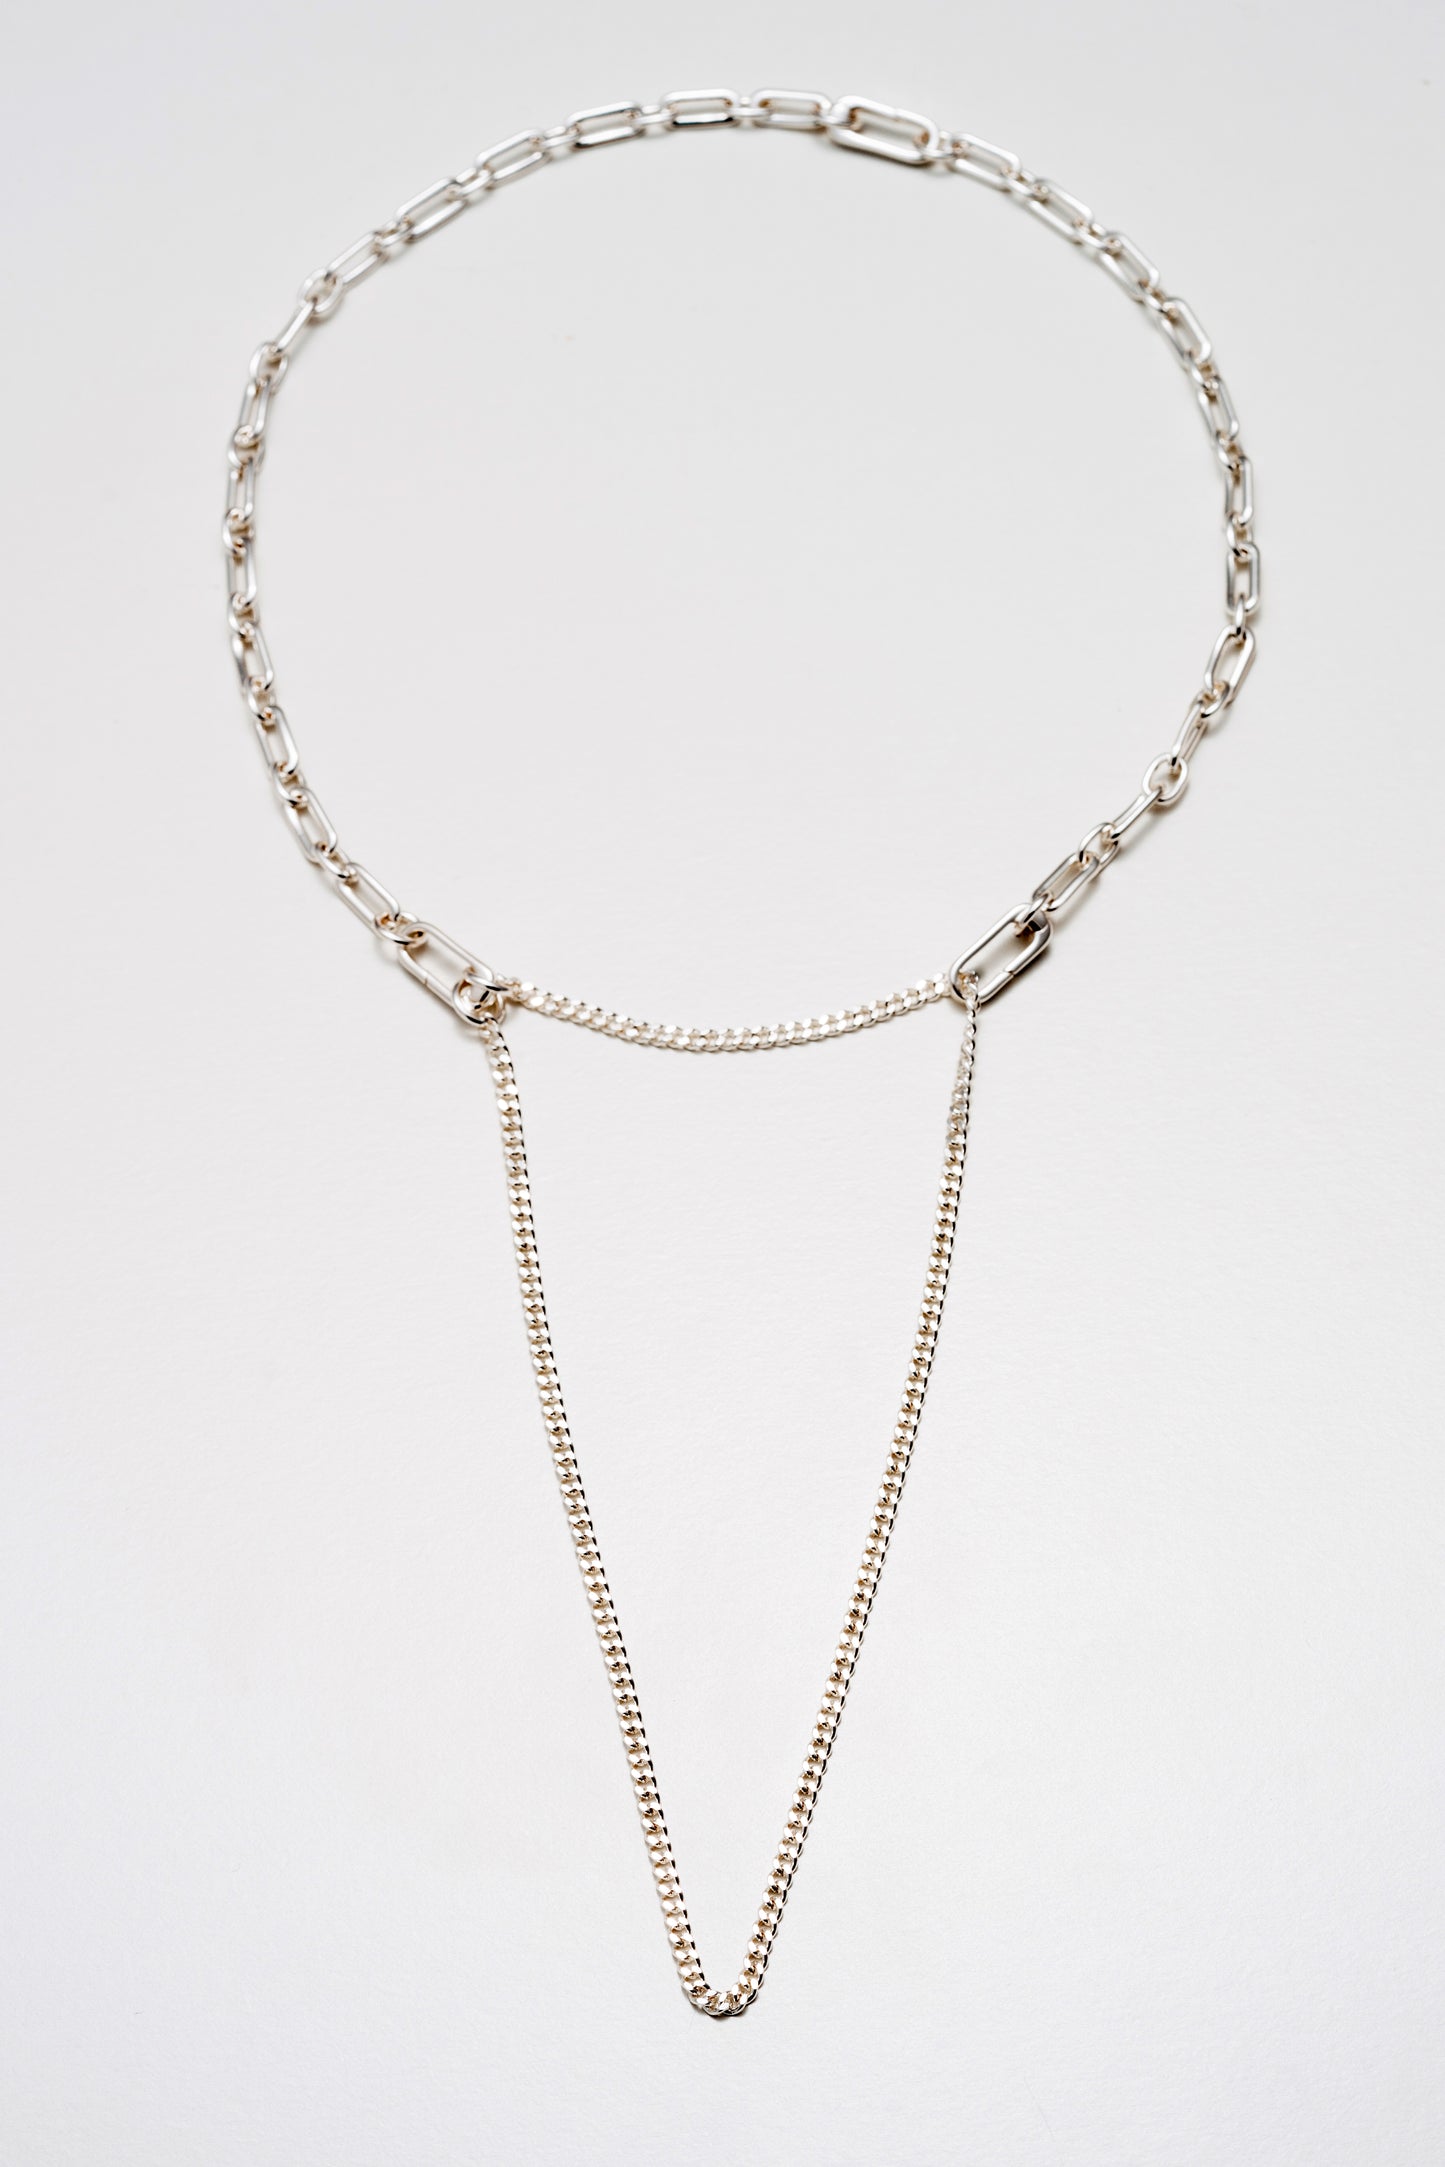 All In One Necklace - Silver